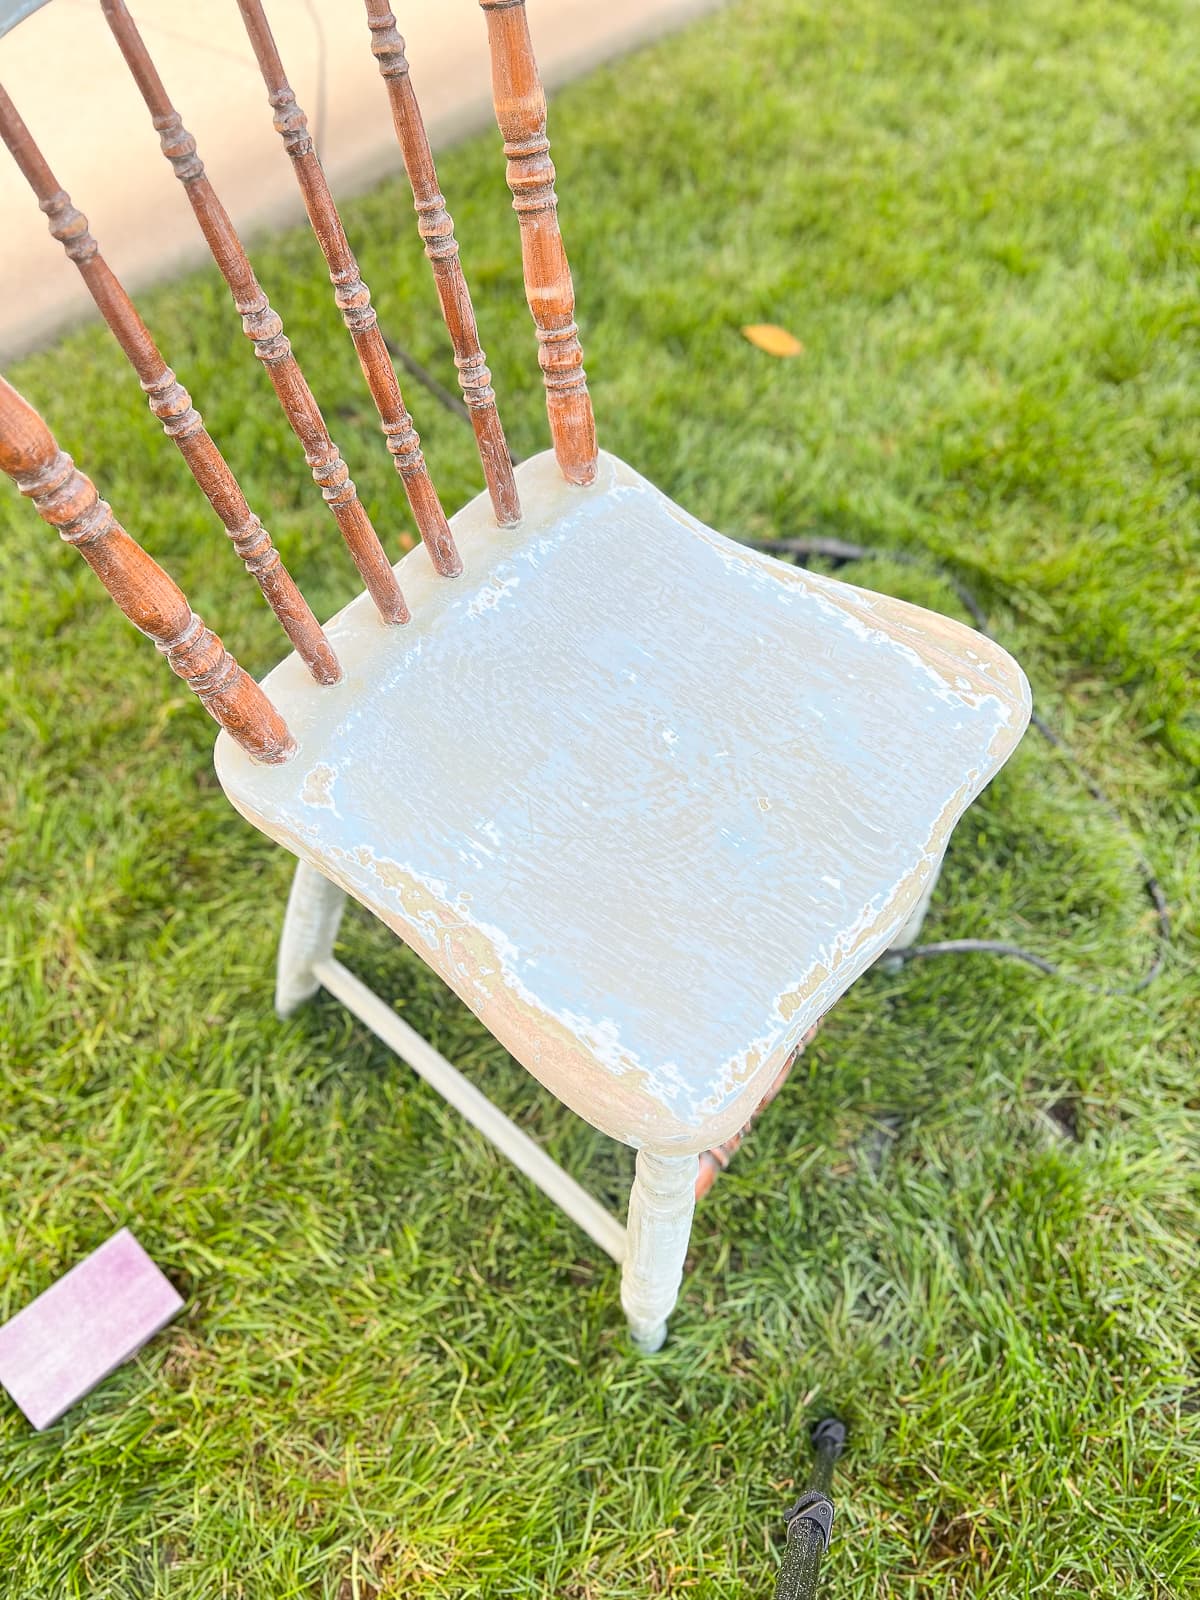 Sanding down an old chair to prep it for chalk paint